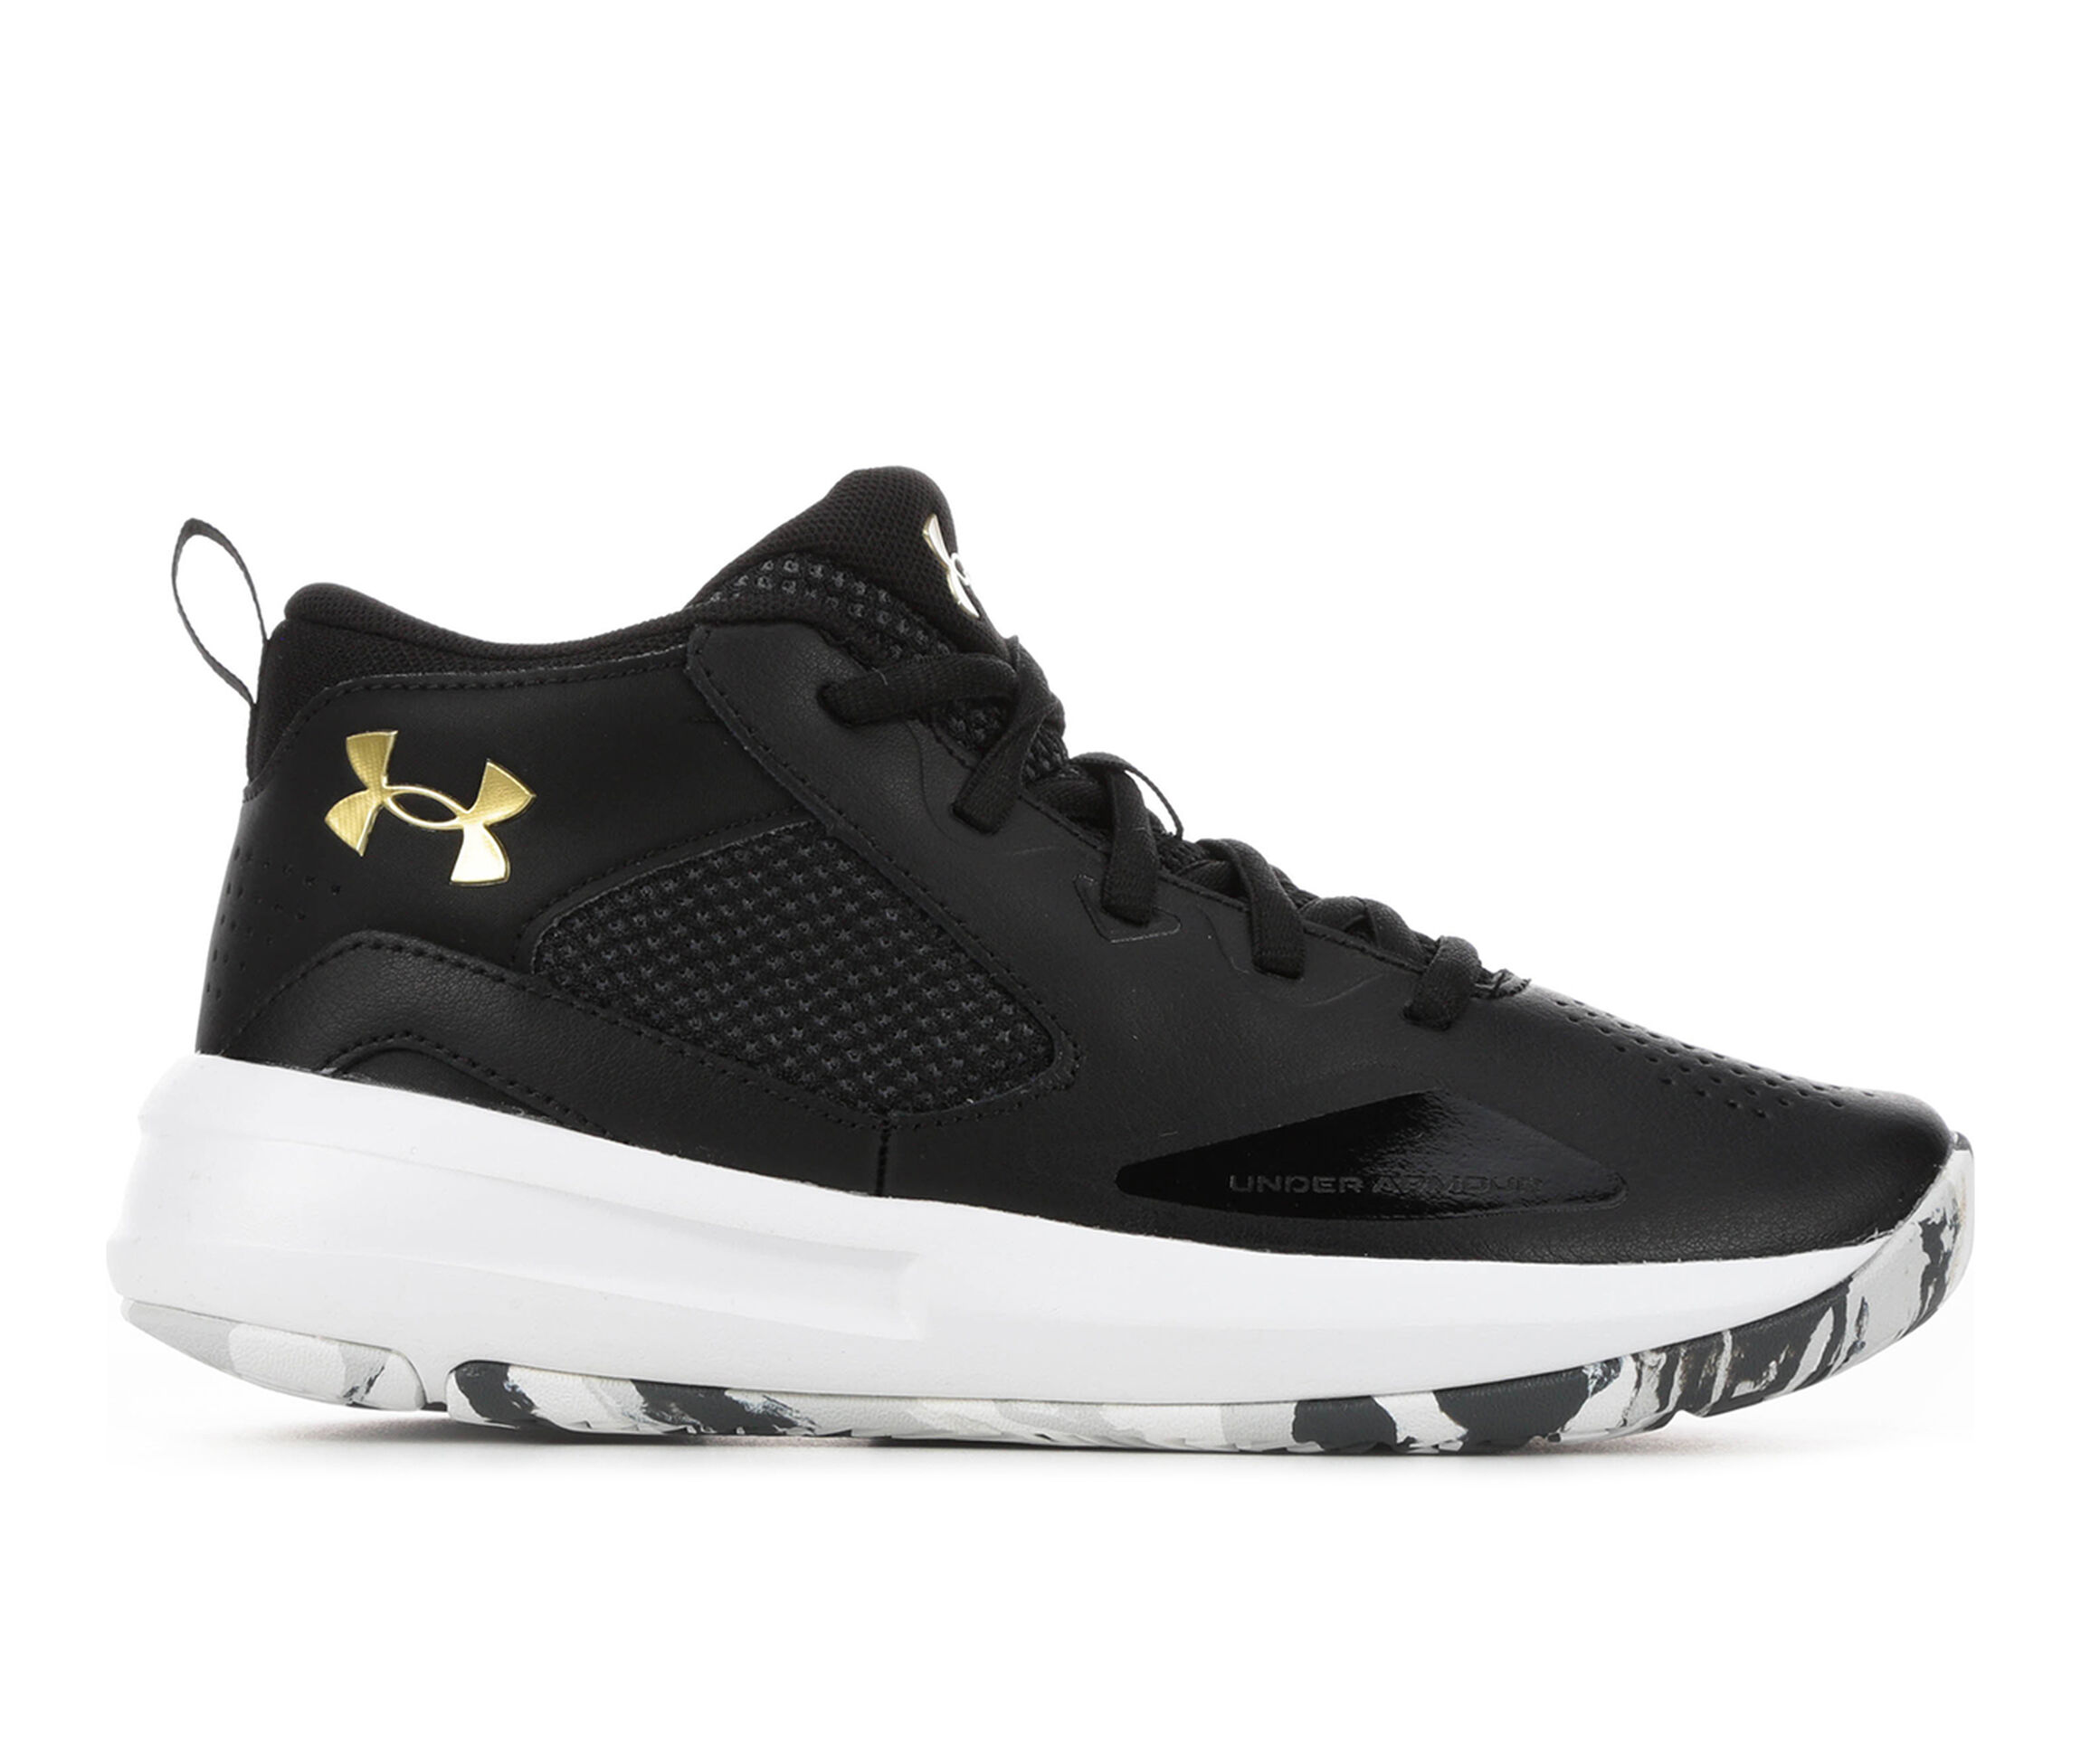 Under Armour Shoes & Accessories | Shoe Carnival